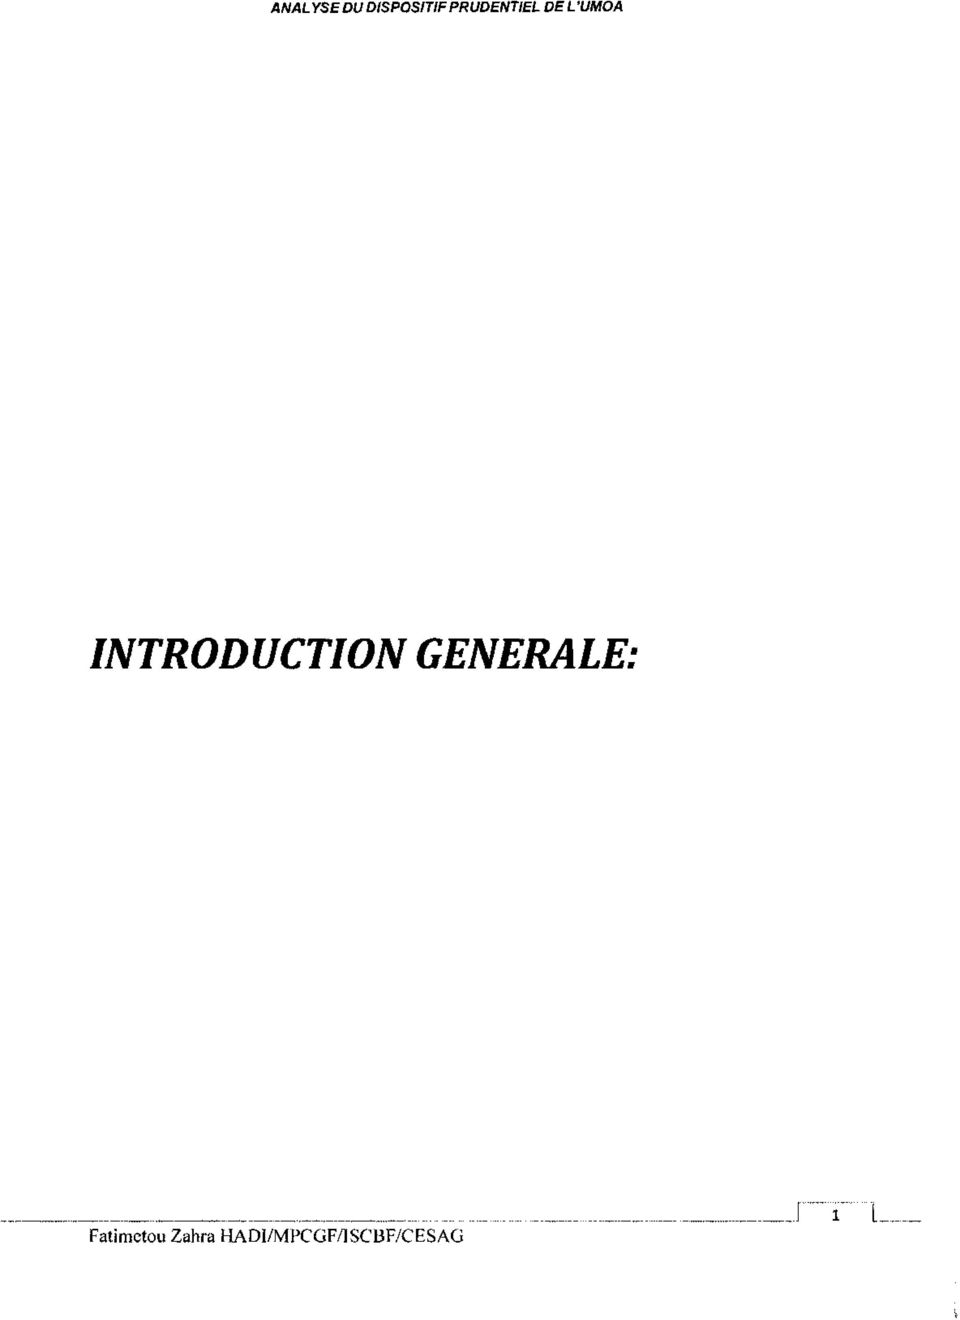 INTRODUCTION GENERALE: